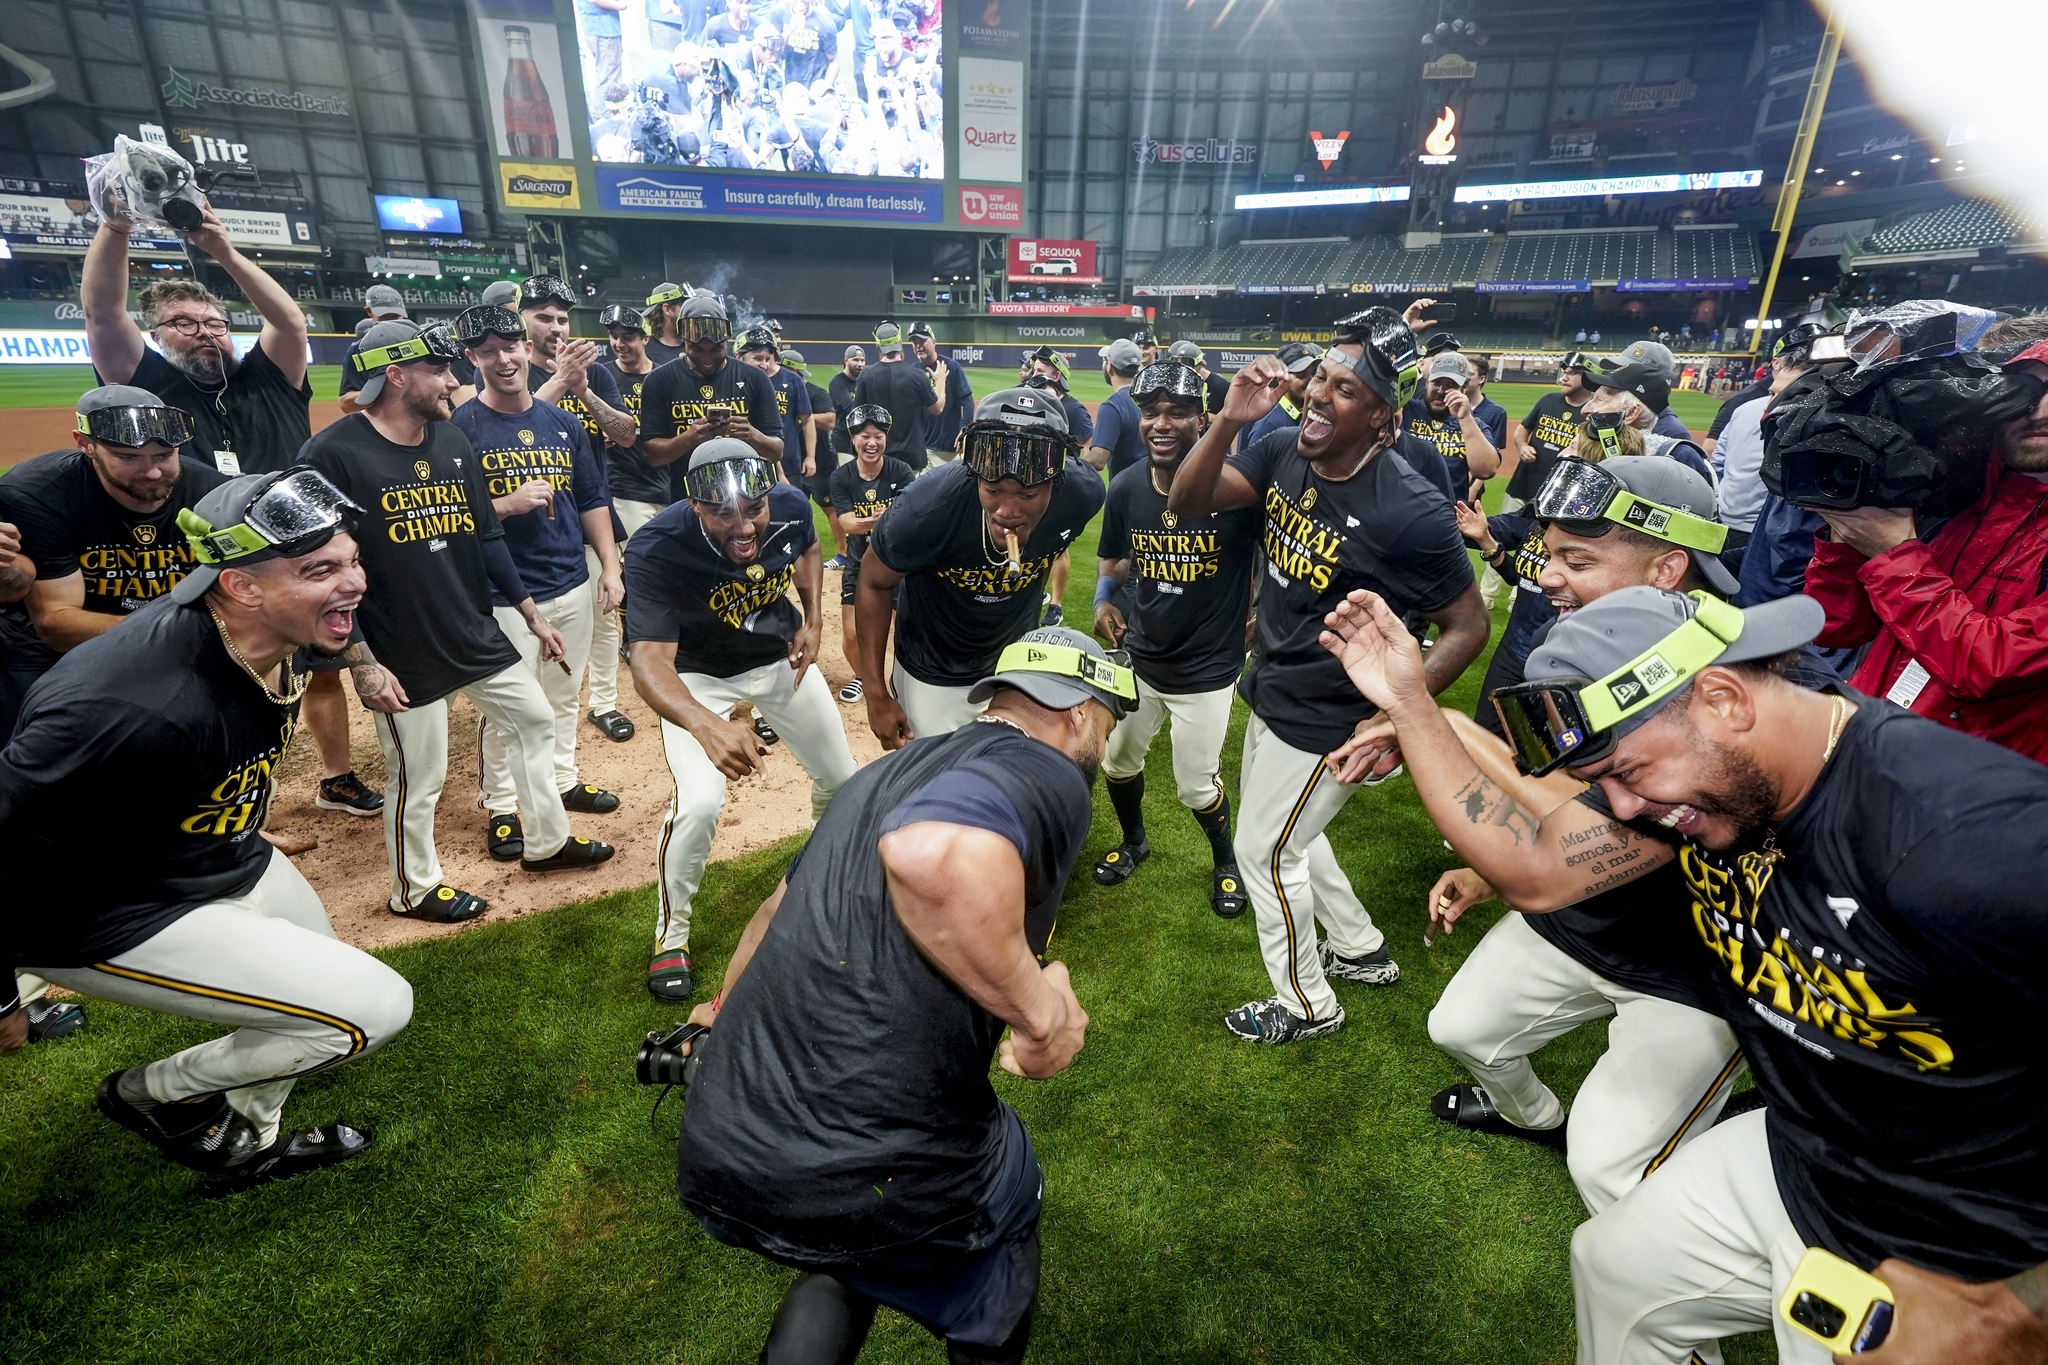 Milwaukee Brewers players celebrate after clinching the National League Central Division.